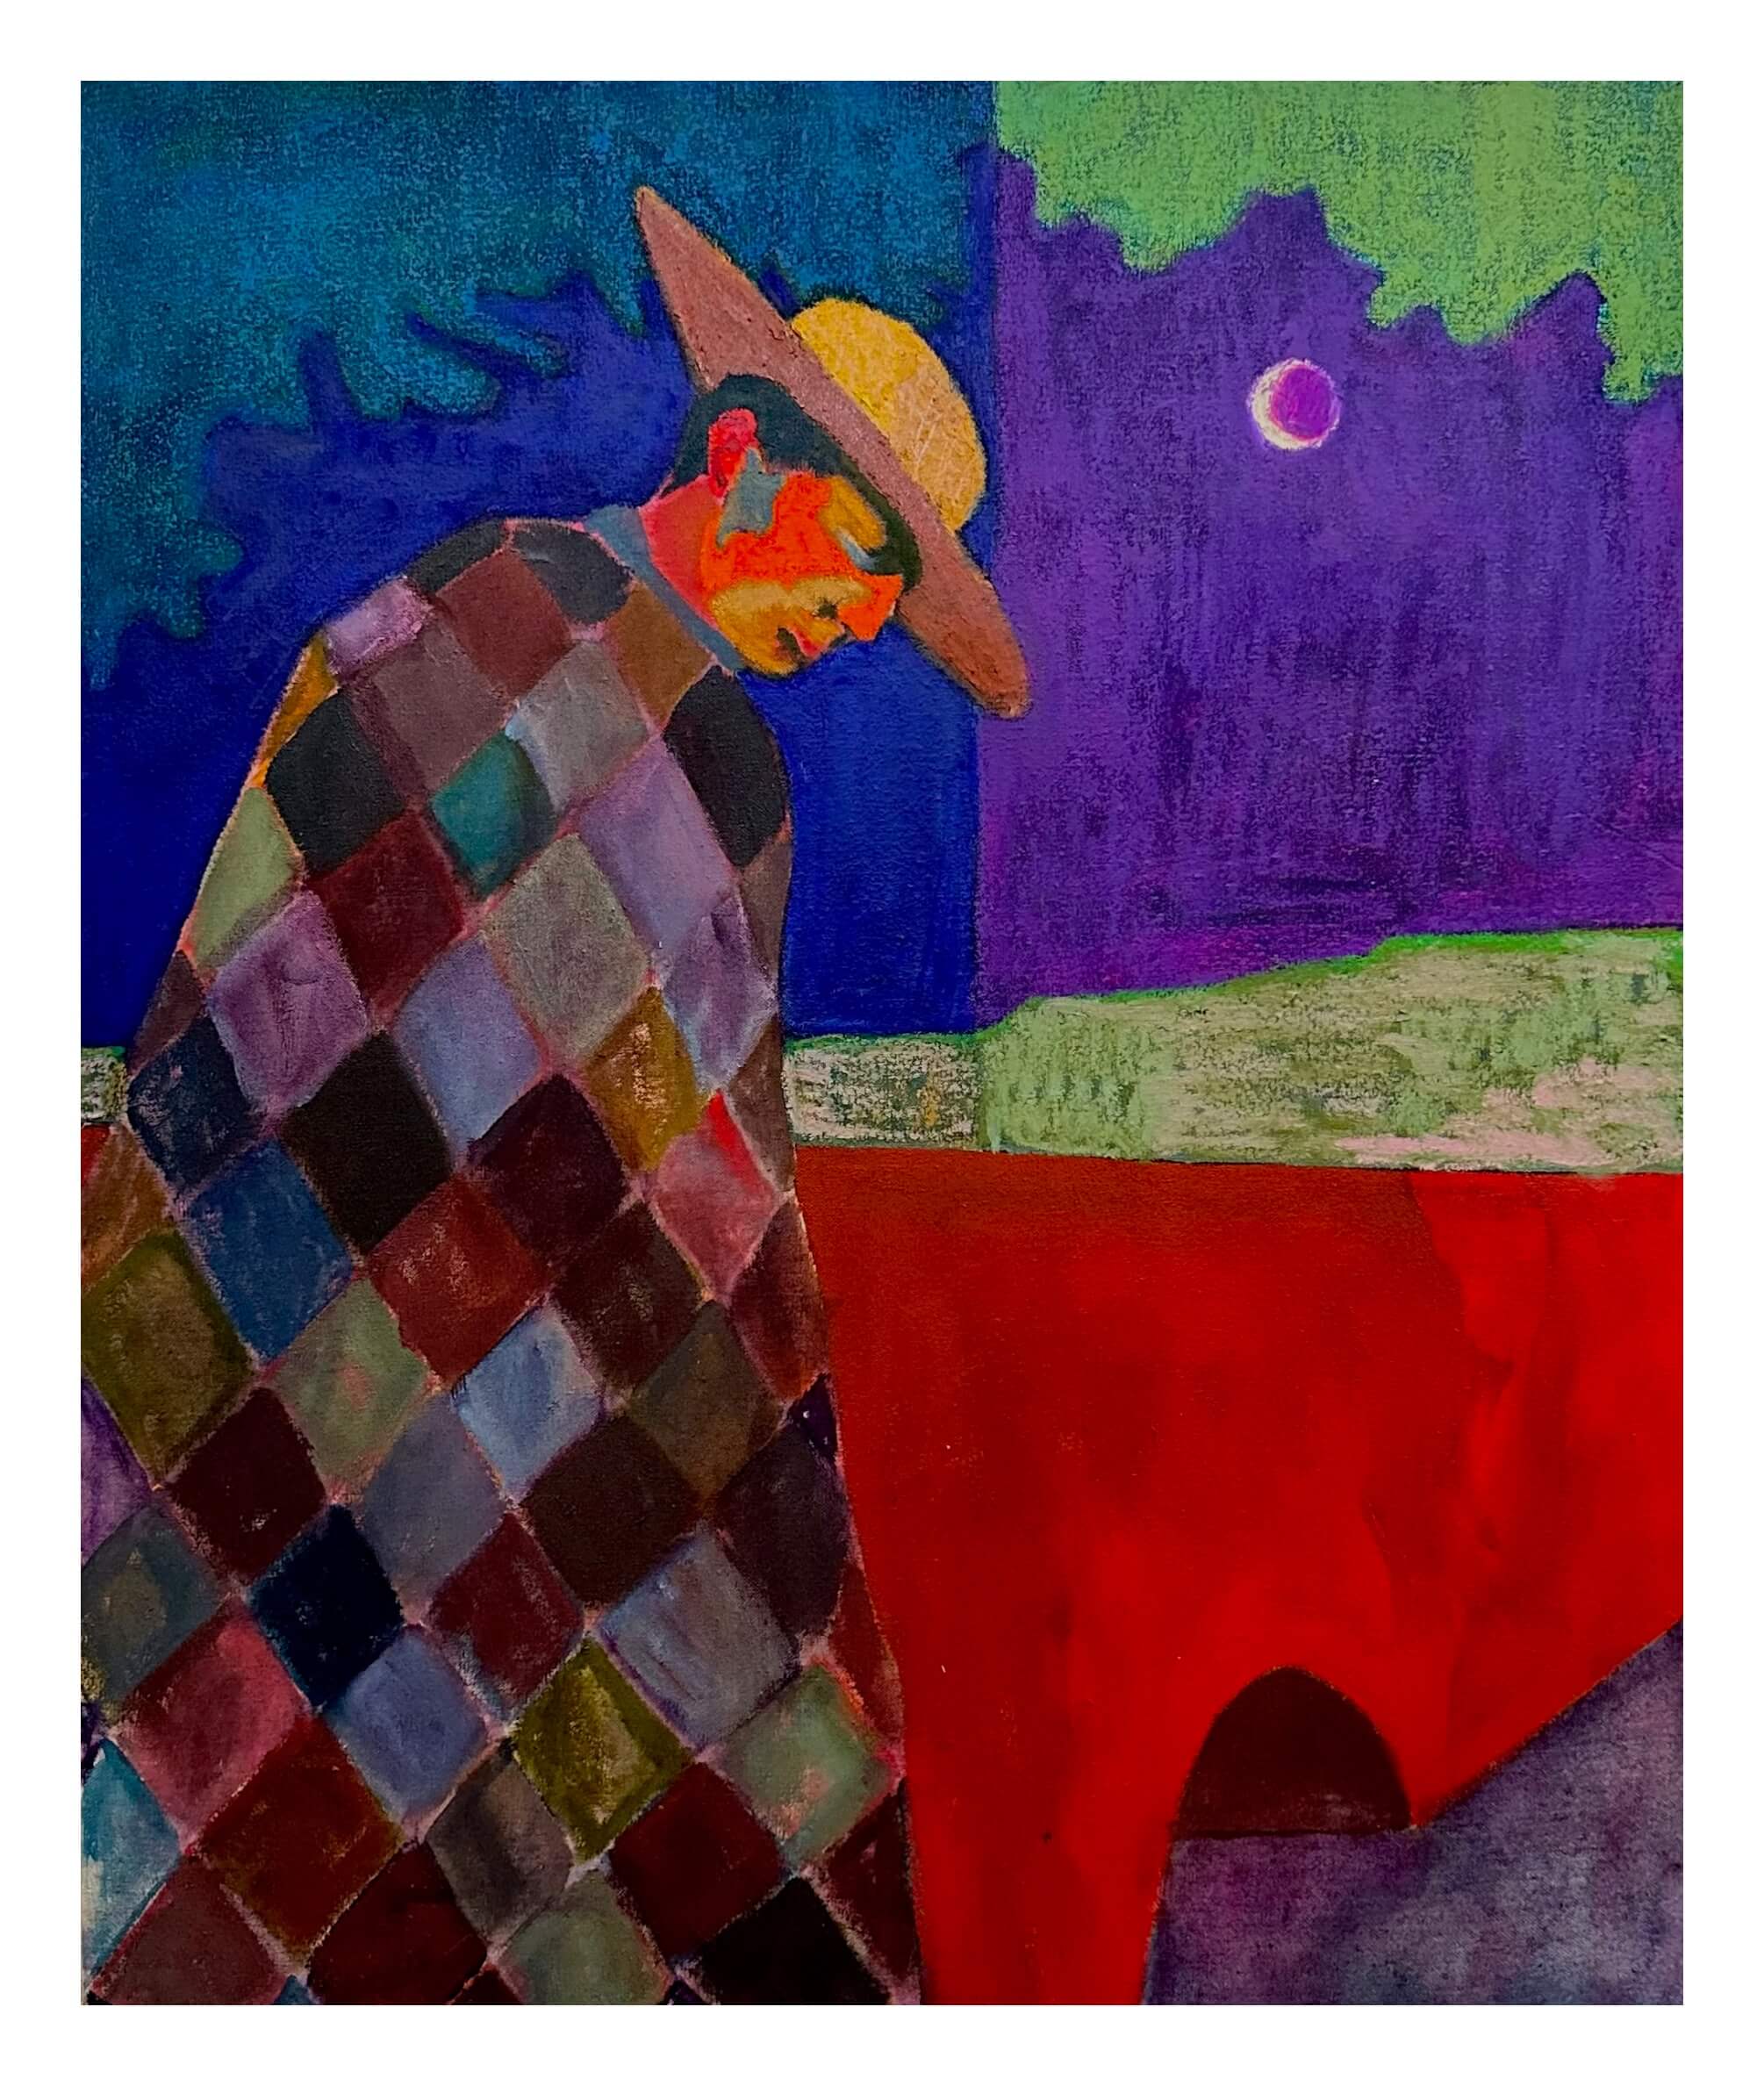 A painting featuring a man in a multi-colored coat and wide brim hat with an evening background